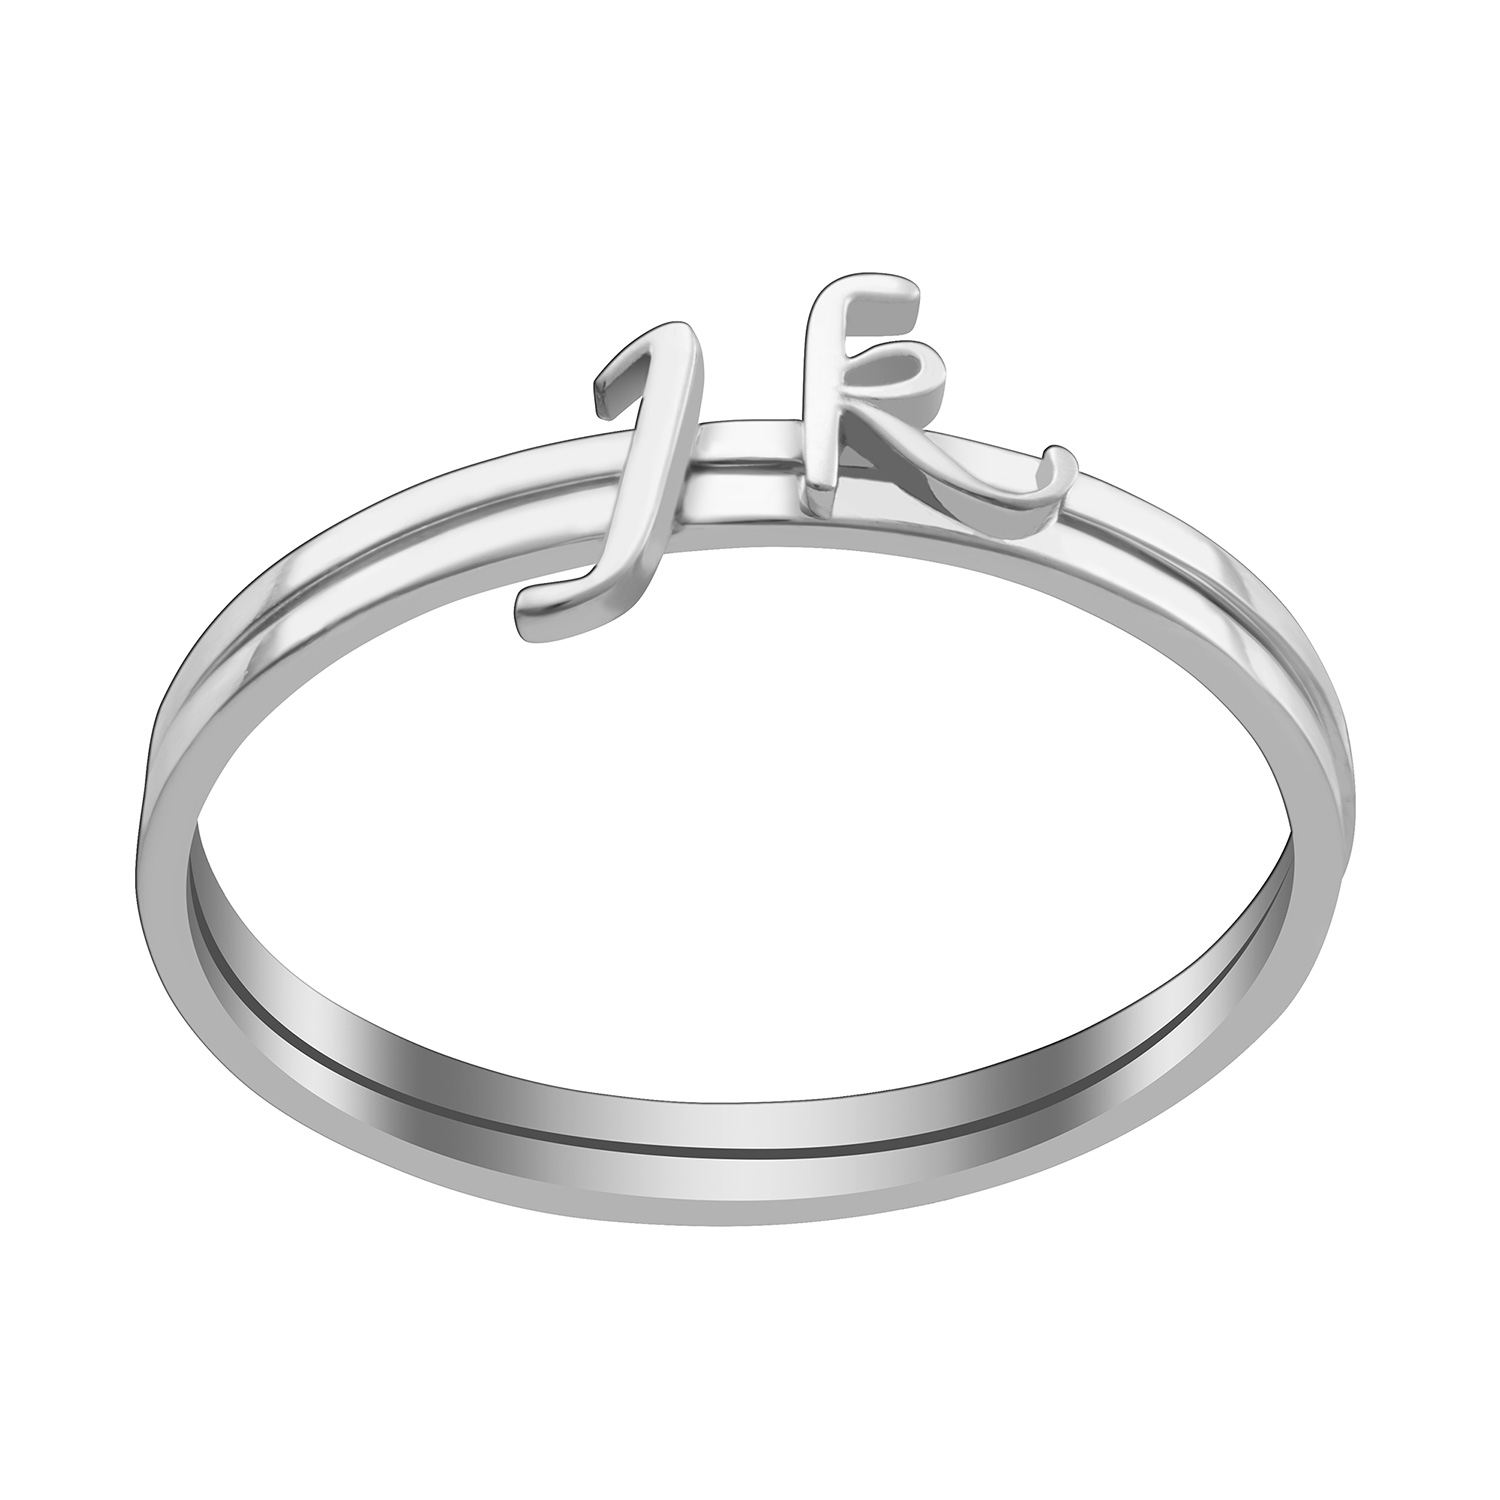 Sterling Silver Petite Lowercase Script Initials Ring - Set of 2